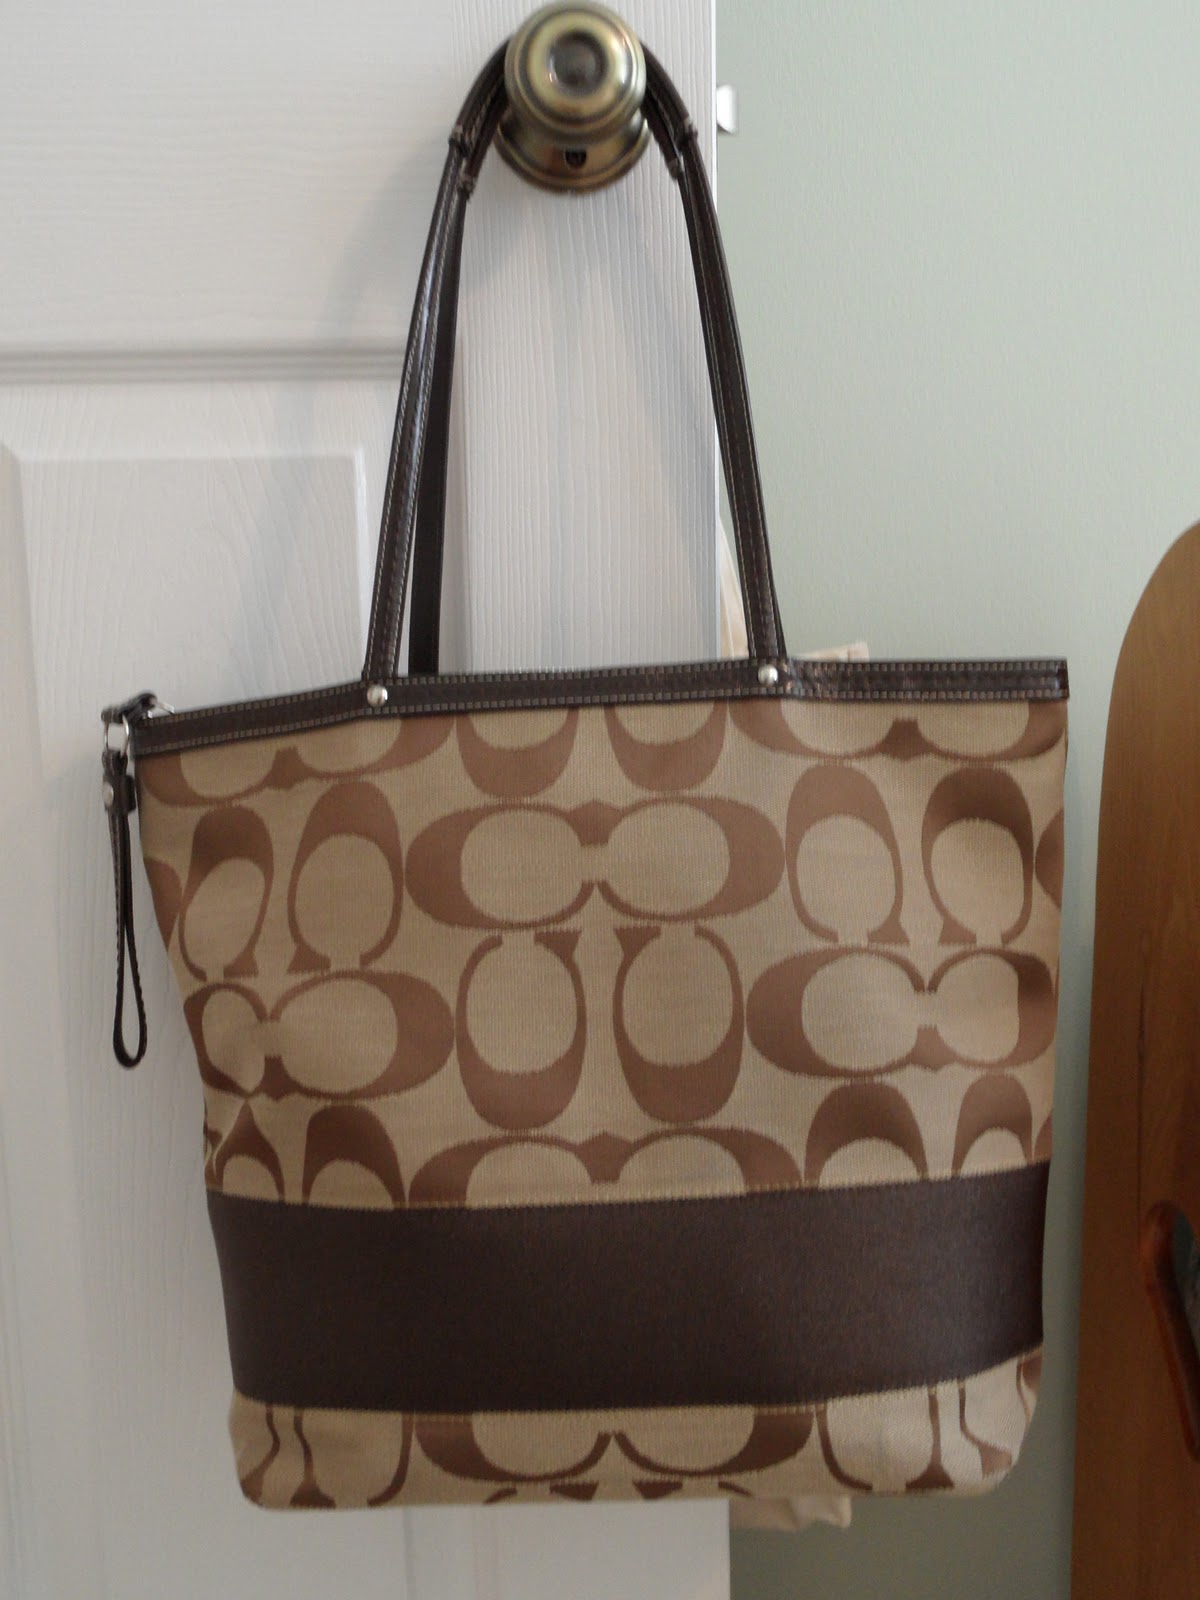 The inside is much the same as the Vera Bradley bag aboveâ€”onelong ...